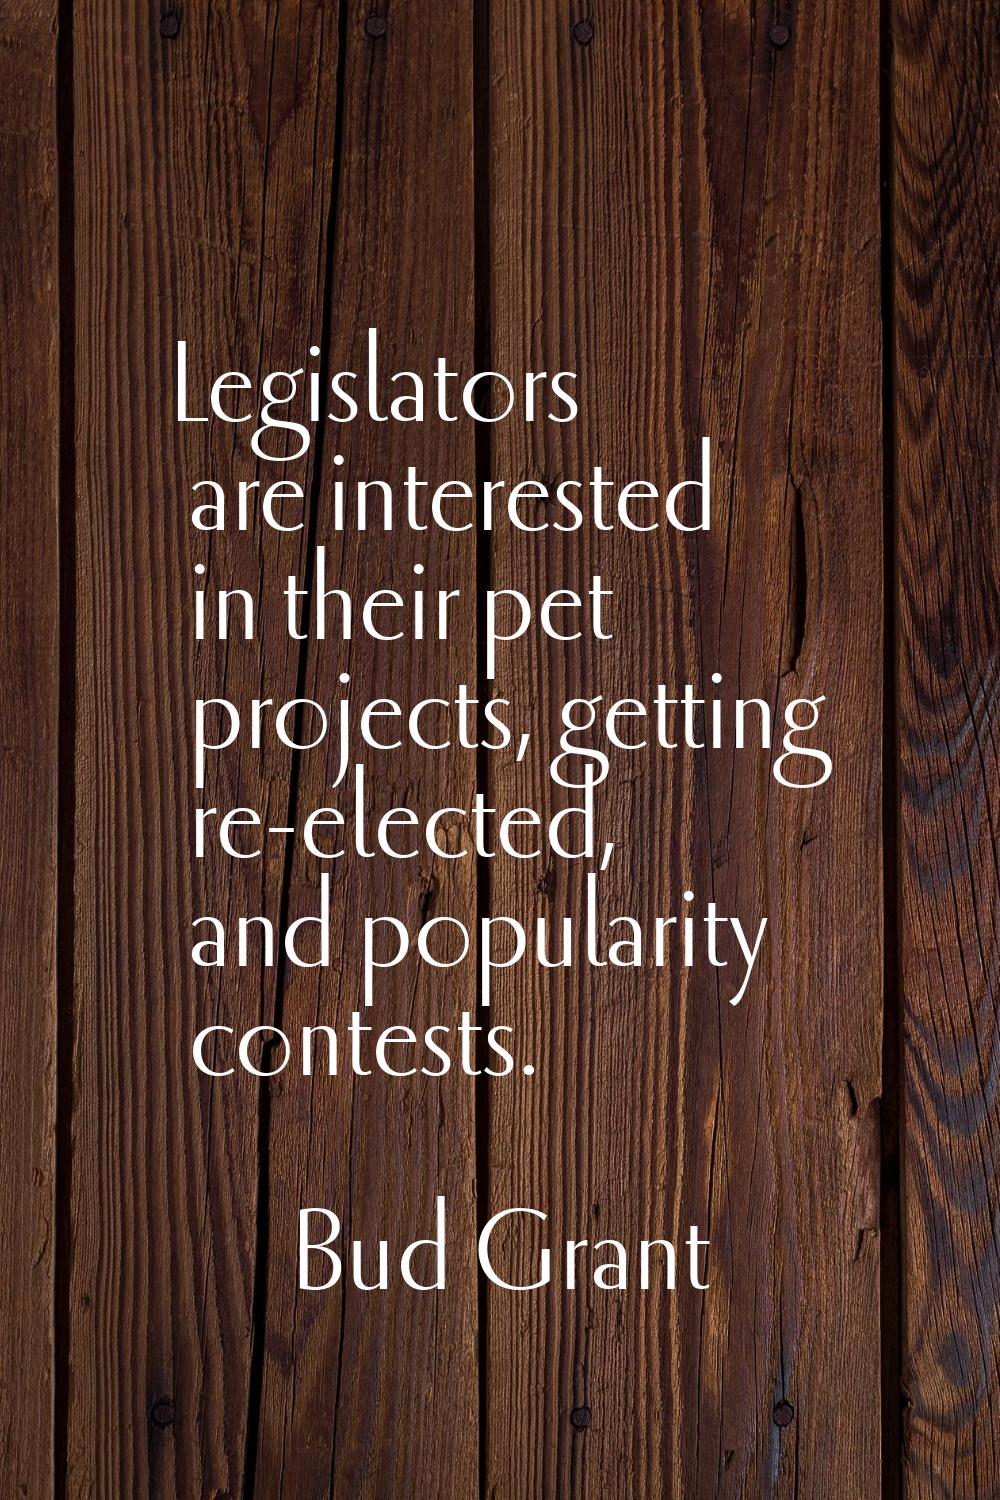 Legislators are interested in their pet projects, getting re-elected, and popularity contests.